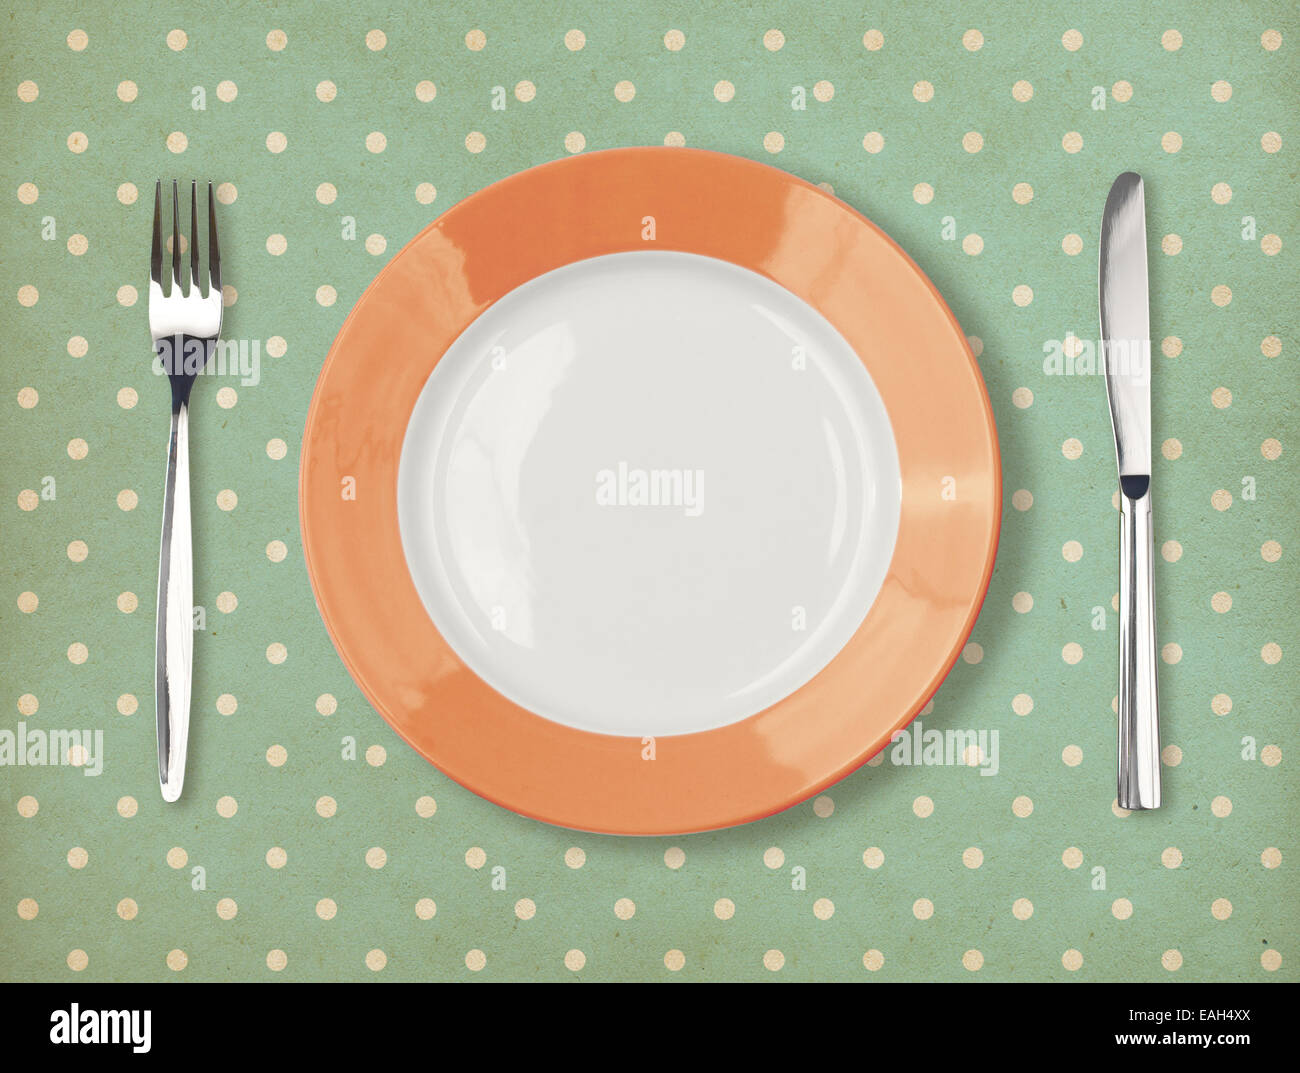 Retro plate with fork and knife on polka dot background Stock Photo